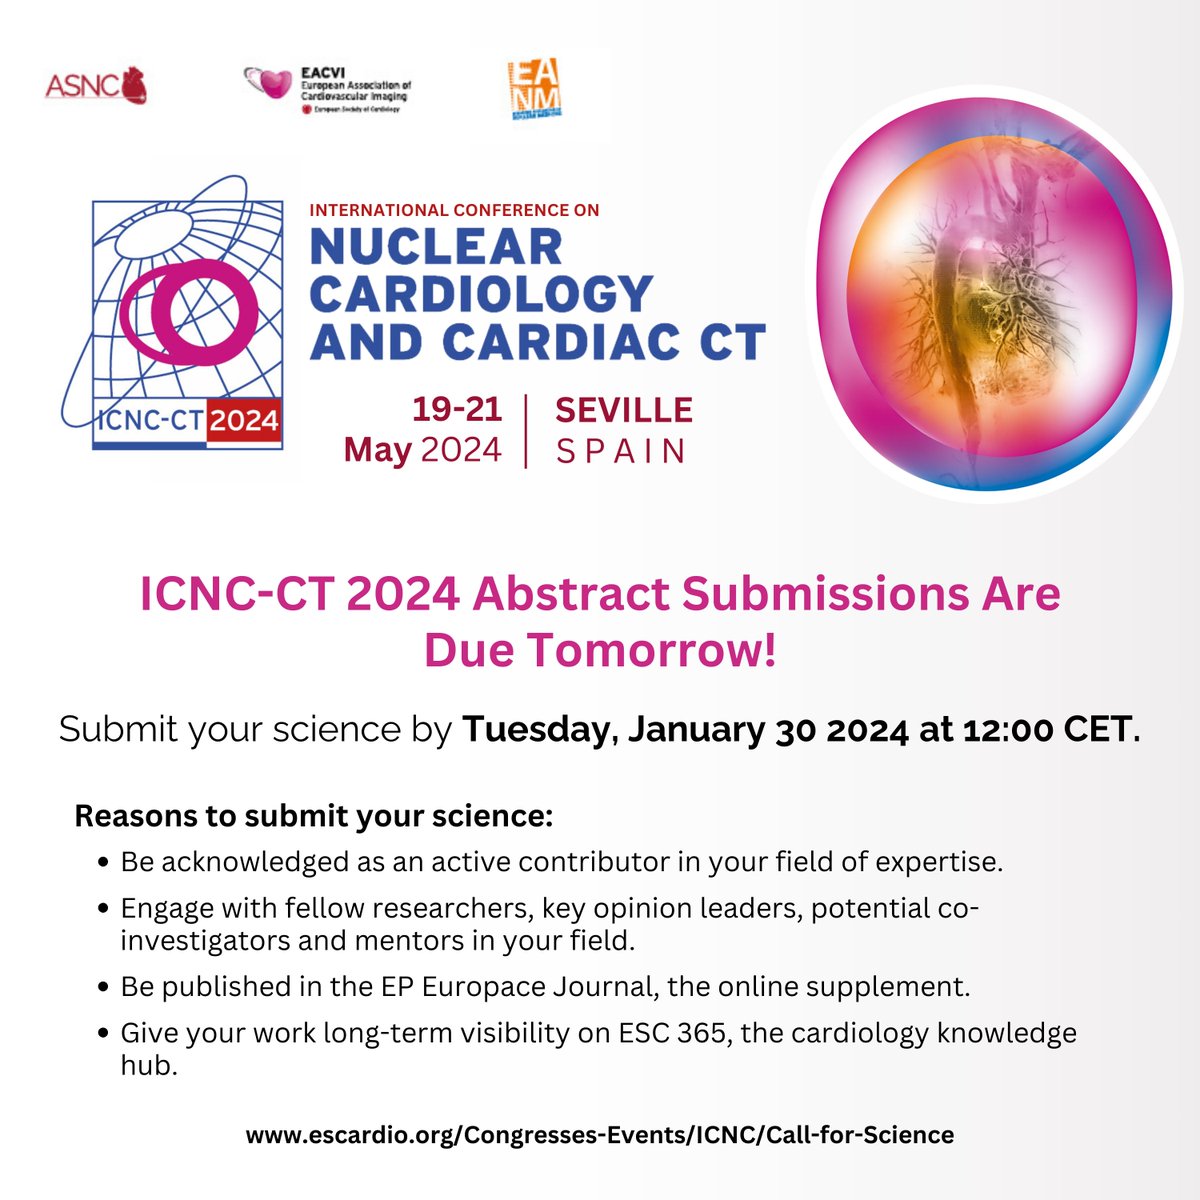 📢Reminder: #ICNCCT2024 Abstracts are due TOMORROW! Don't miss out on this opportunity to:
🔬 Showcase your expertise 
🤝 Connect w/ researchers & mentors 
📚 Get published in EP Europace Journal 
🌐 Gain long-term visibility on ESC 365

Submit 👉 bit.ly/490e5o1 
 #CVNuc